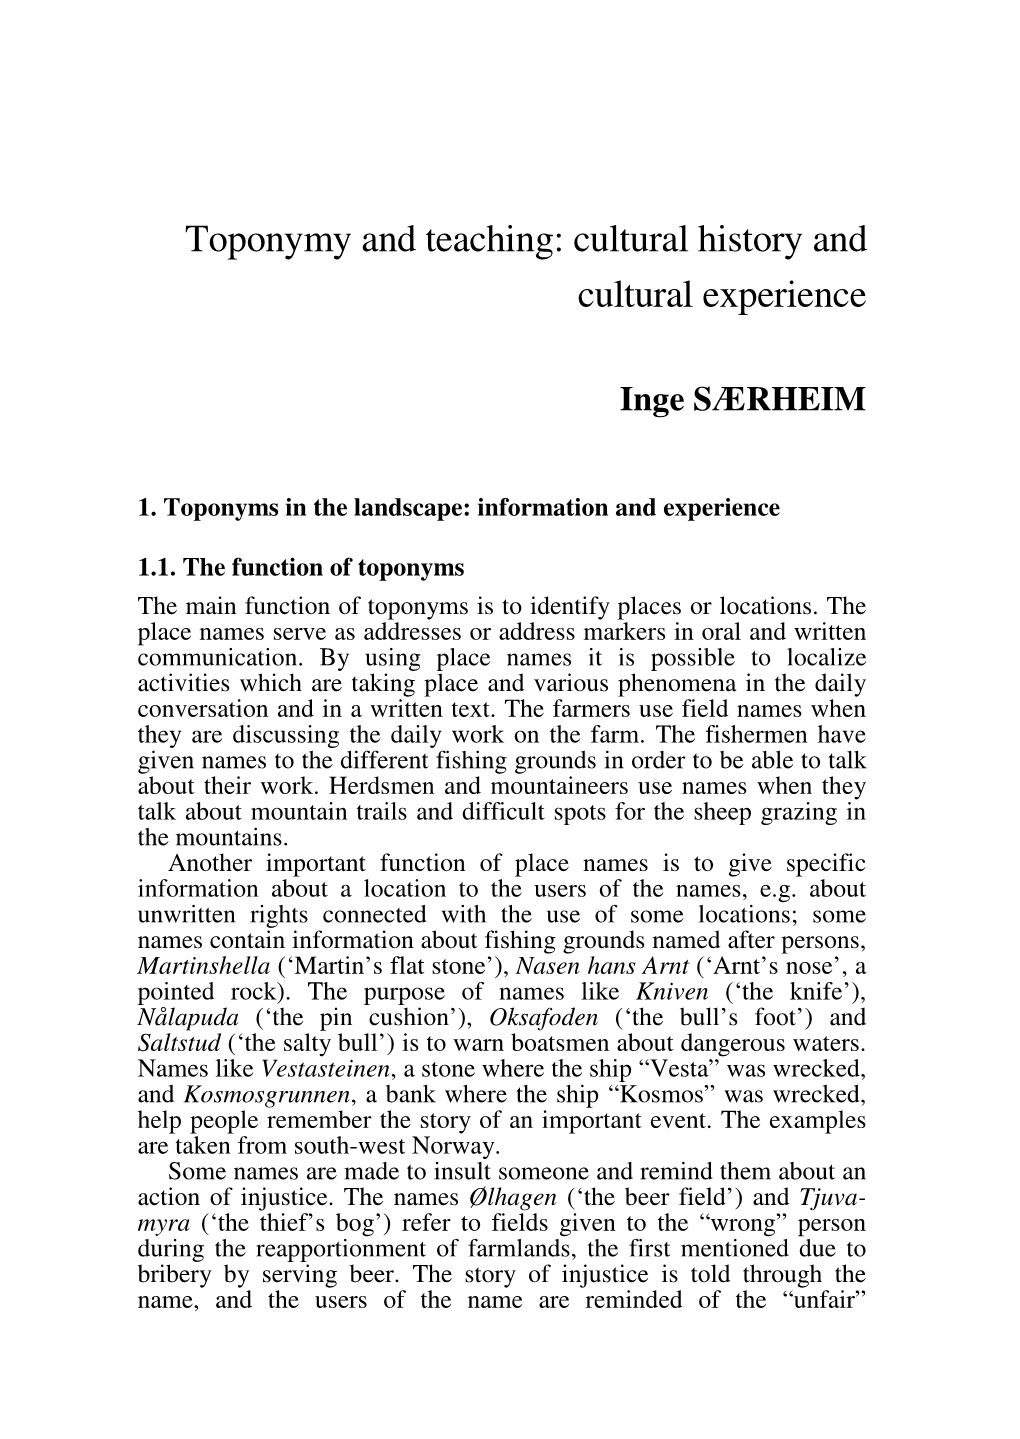 Toponymy and Teaching: Cultural History and Cultural Experience